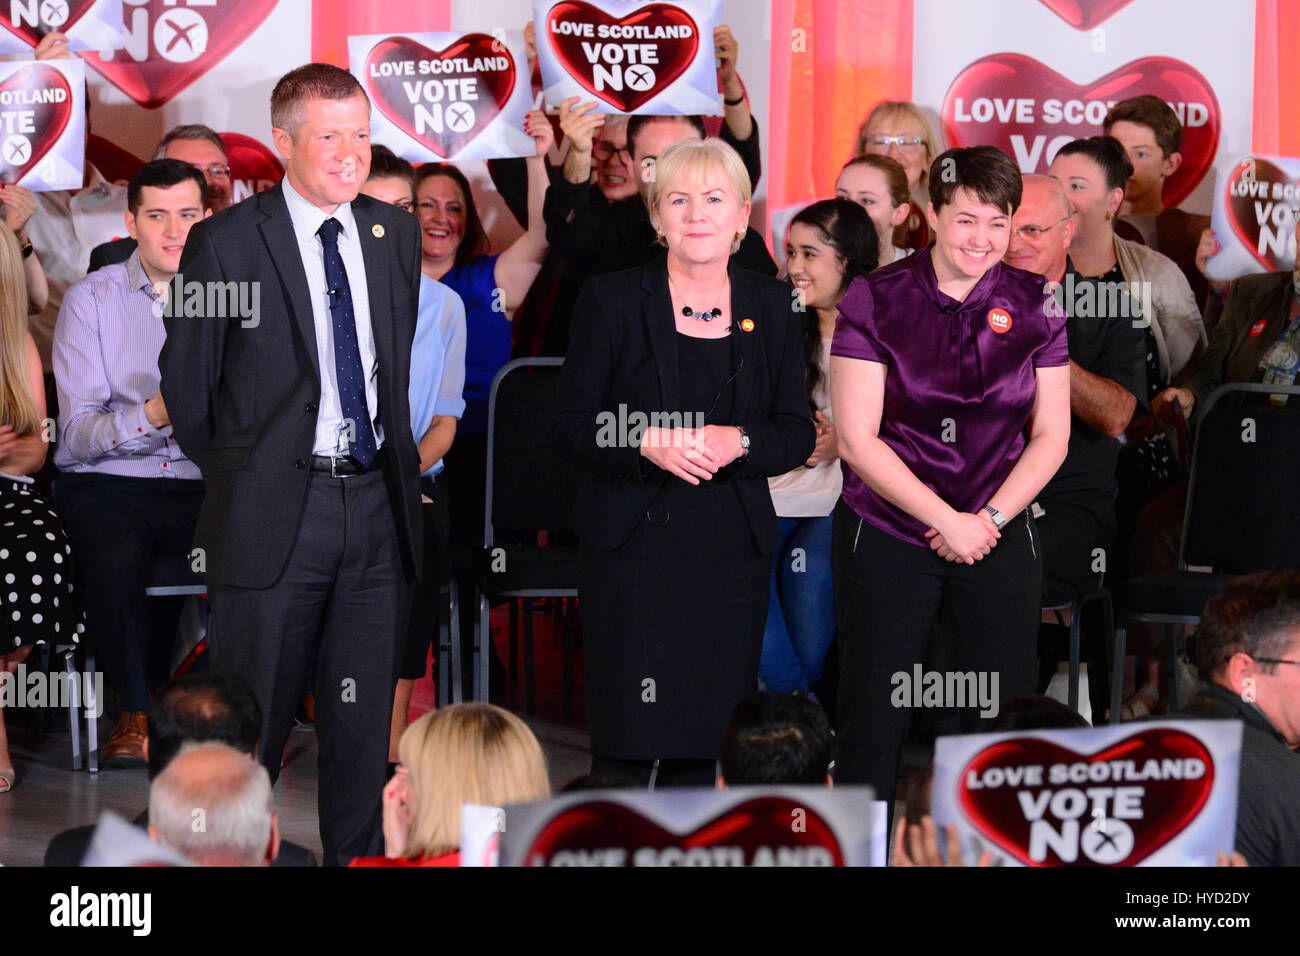 Leaders of the Scottish pro-union parties at a Better Together campaign rally in Glasgow (L to R Willie Rennie, Liberal Democrats; Johann Lamont, Labour; Ruth Davidson, Conservative) Stock Photo